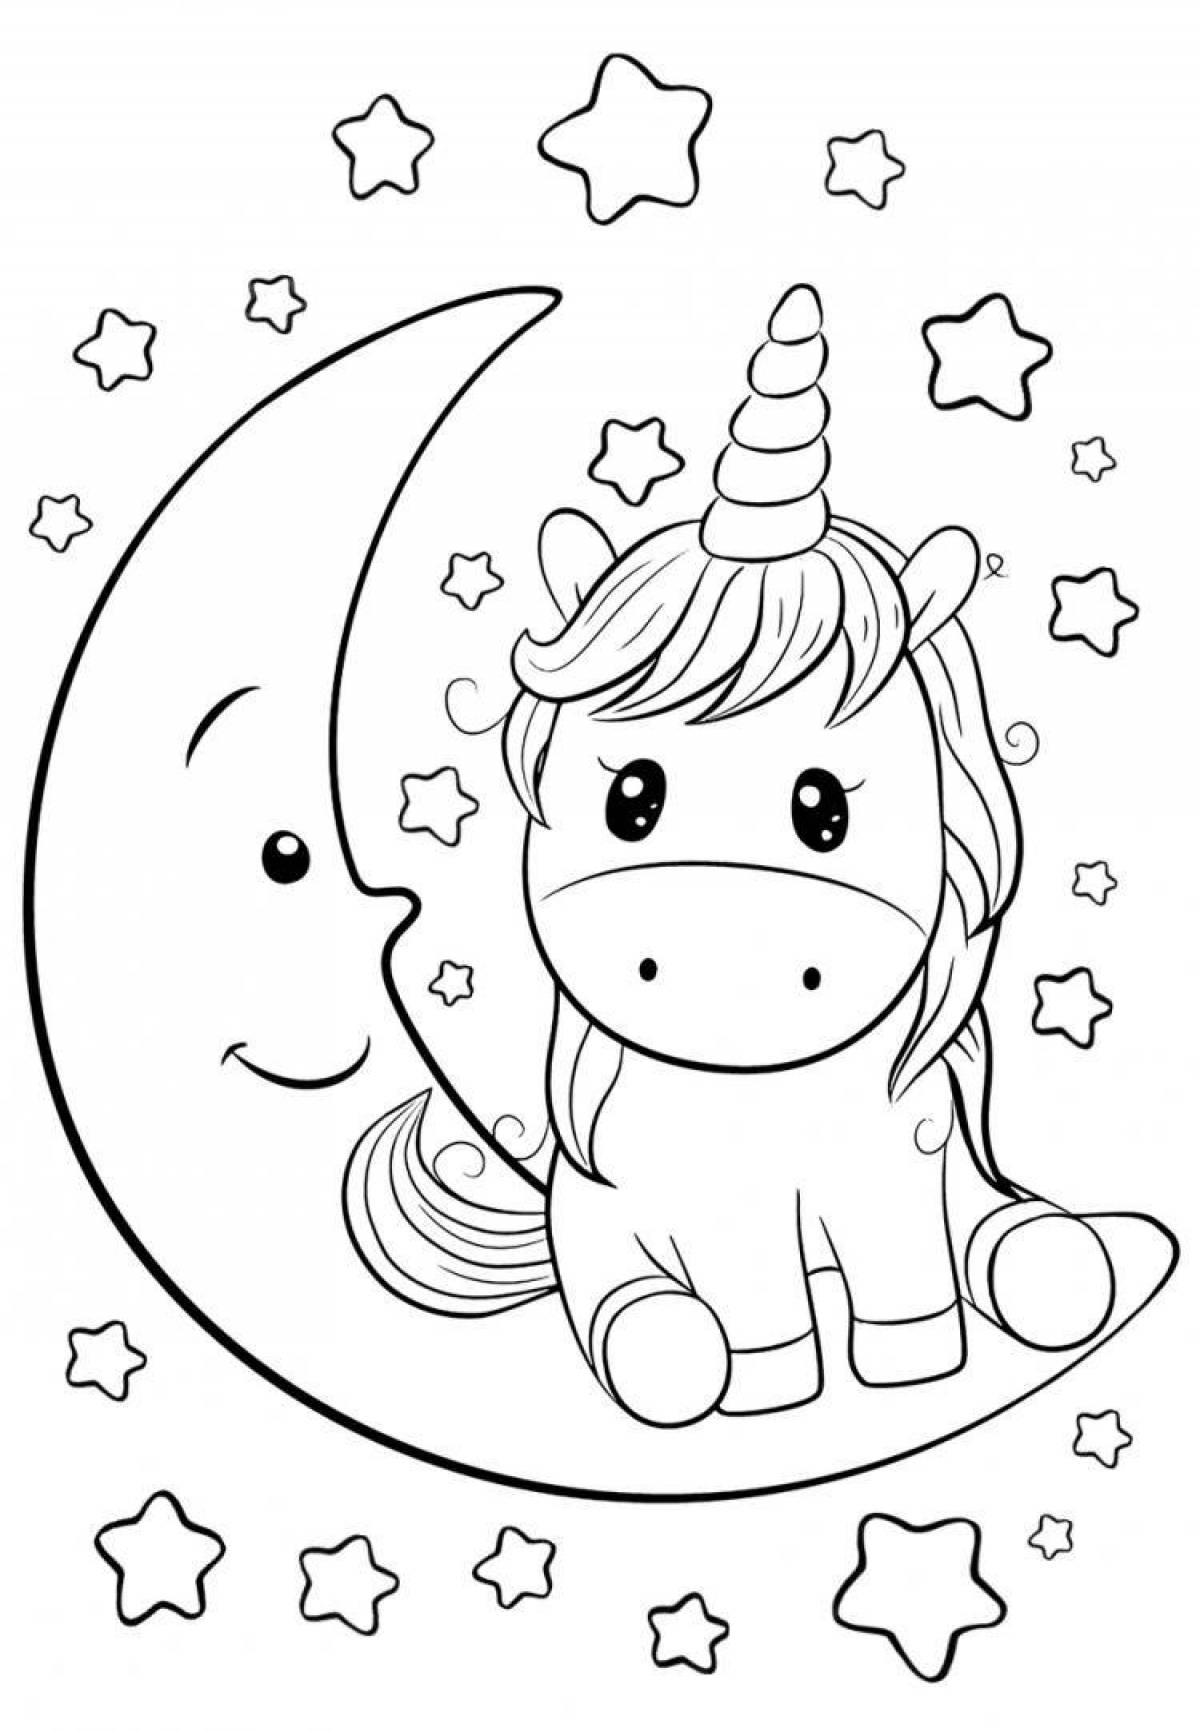 Colorful coloring book for children 5-6 years old unicorns